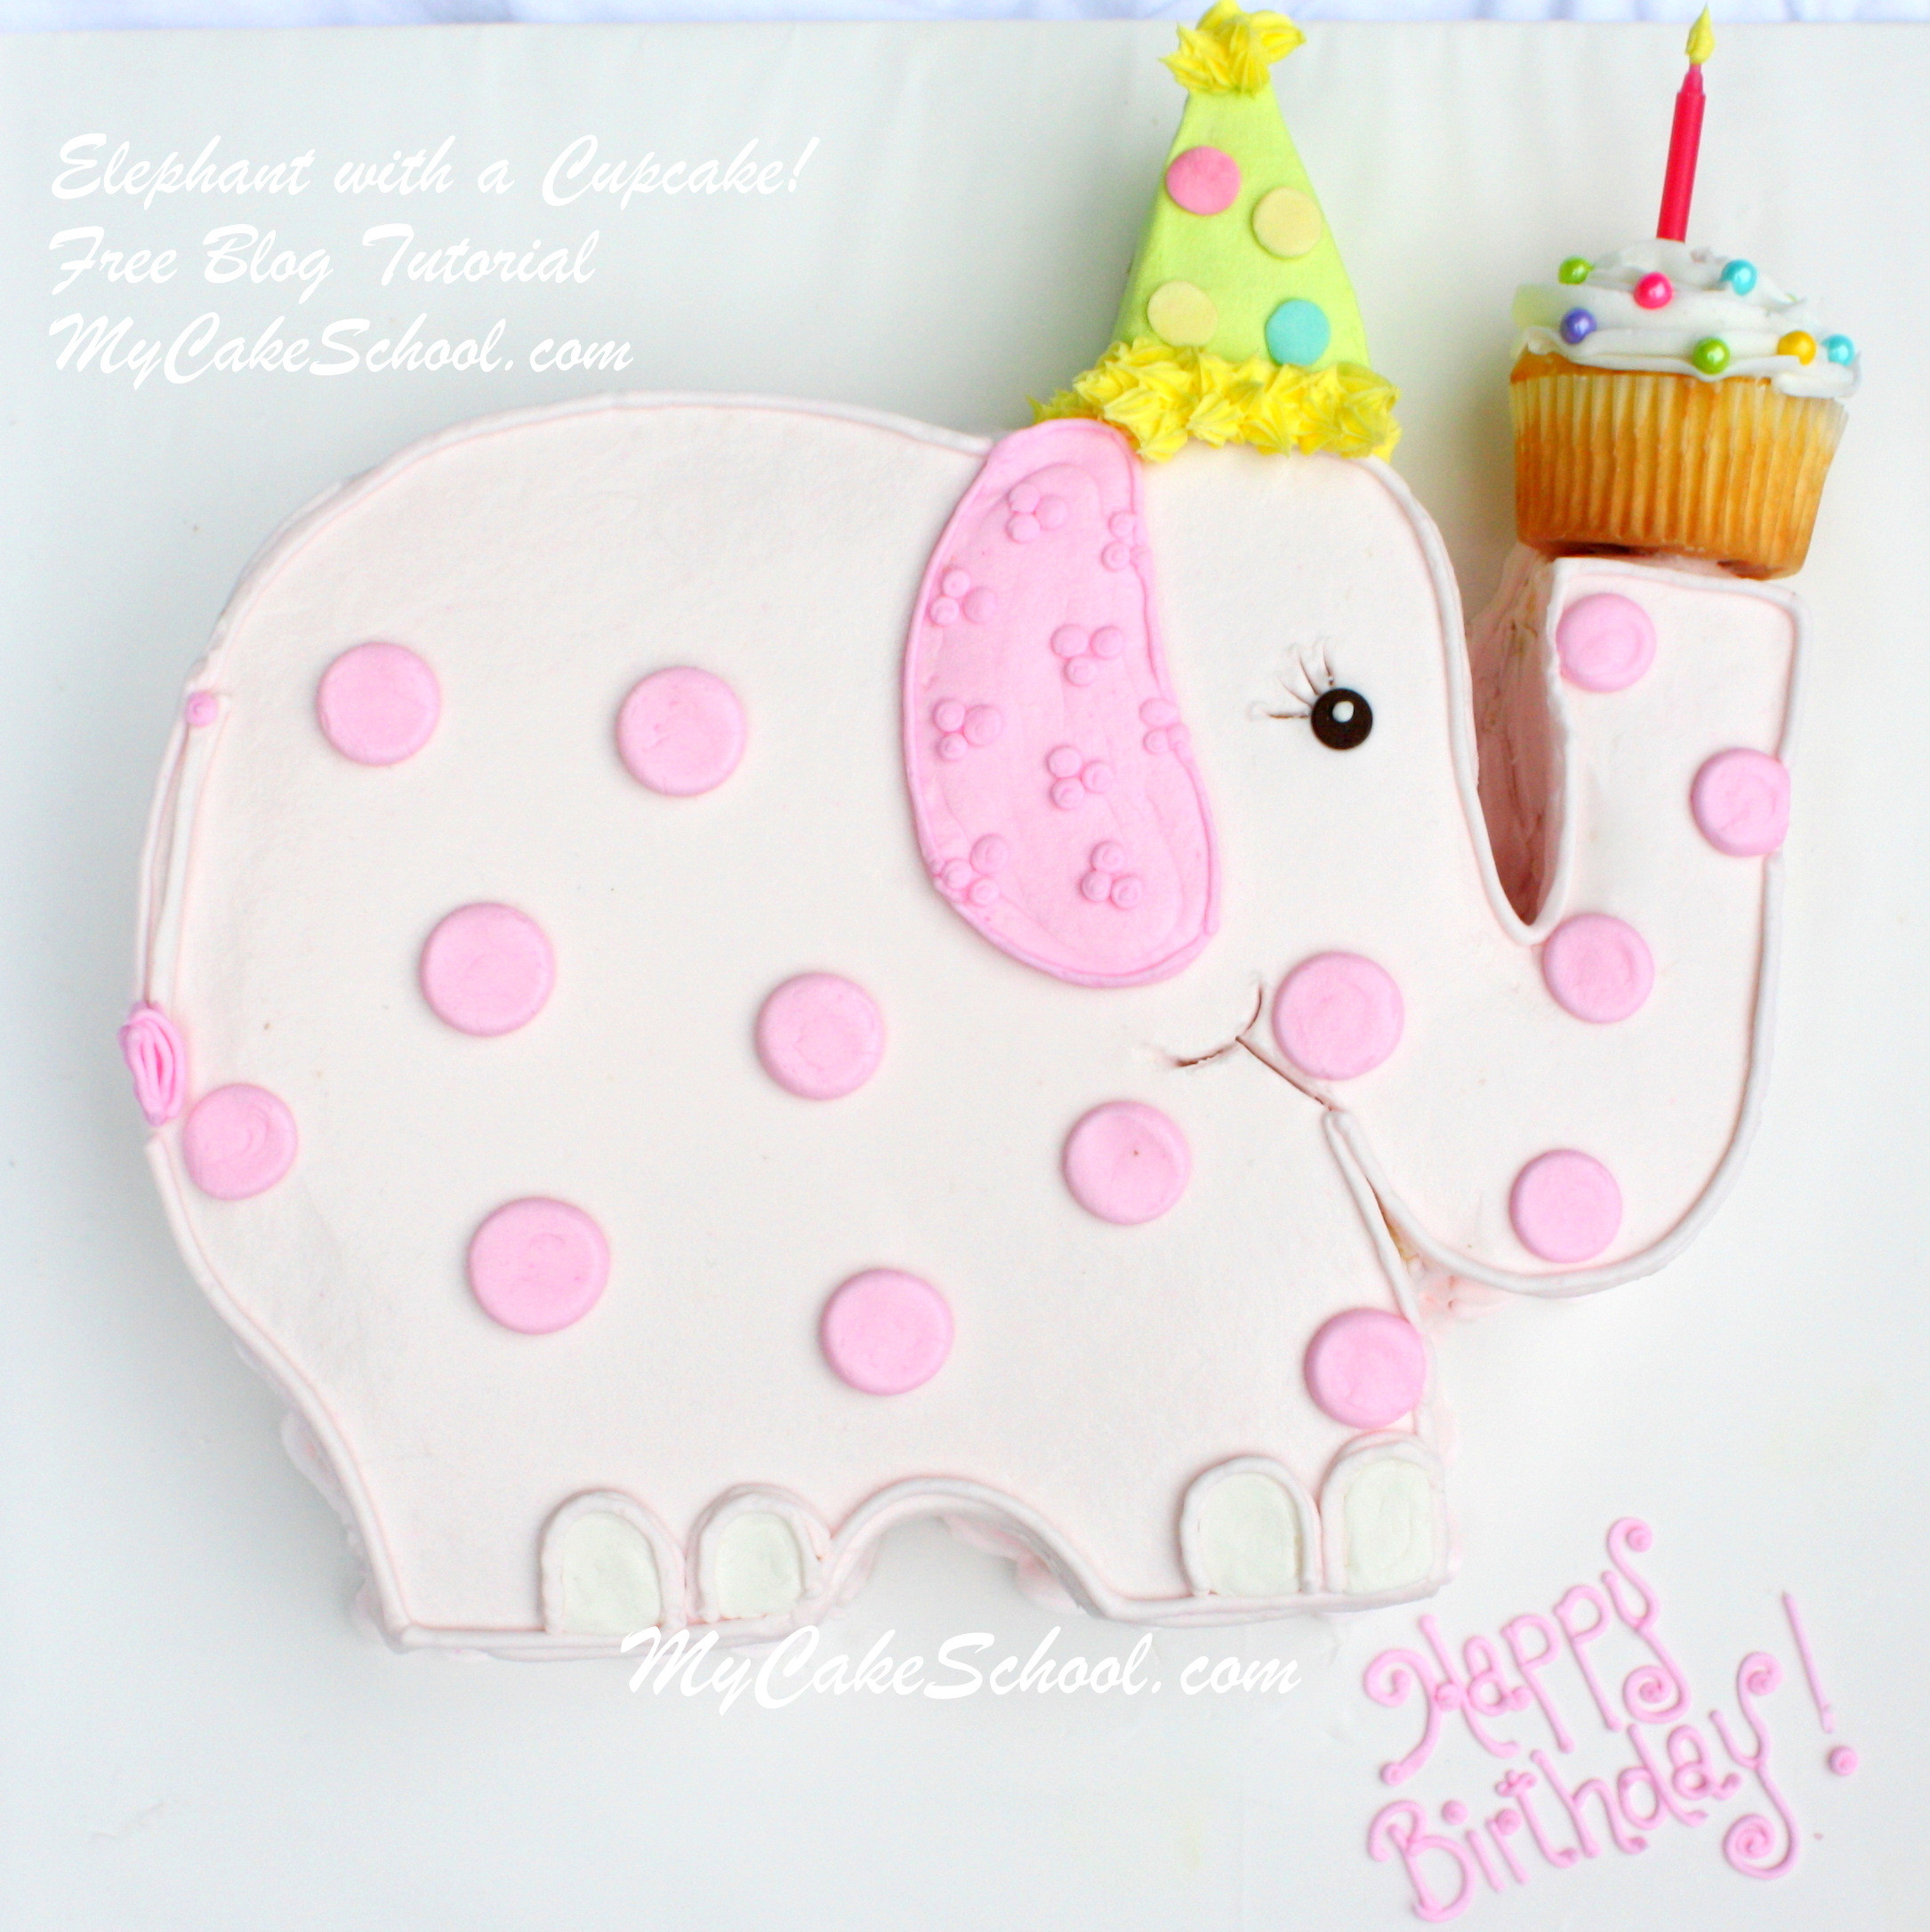 Best ideas about Elephant Birthday Cake
. Save or Pin Elephant with a Cupcake A Blog Tutorial Now.